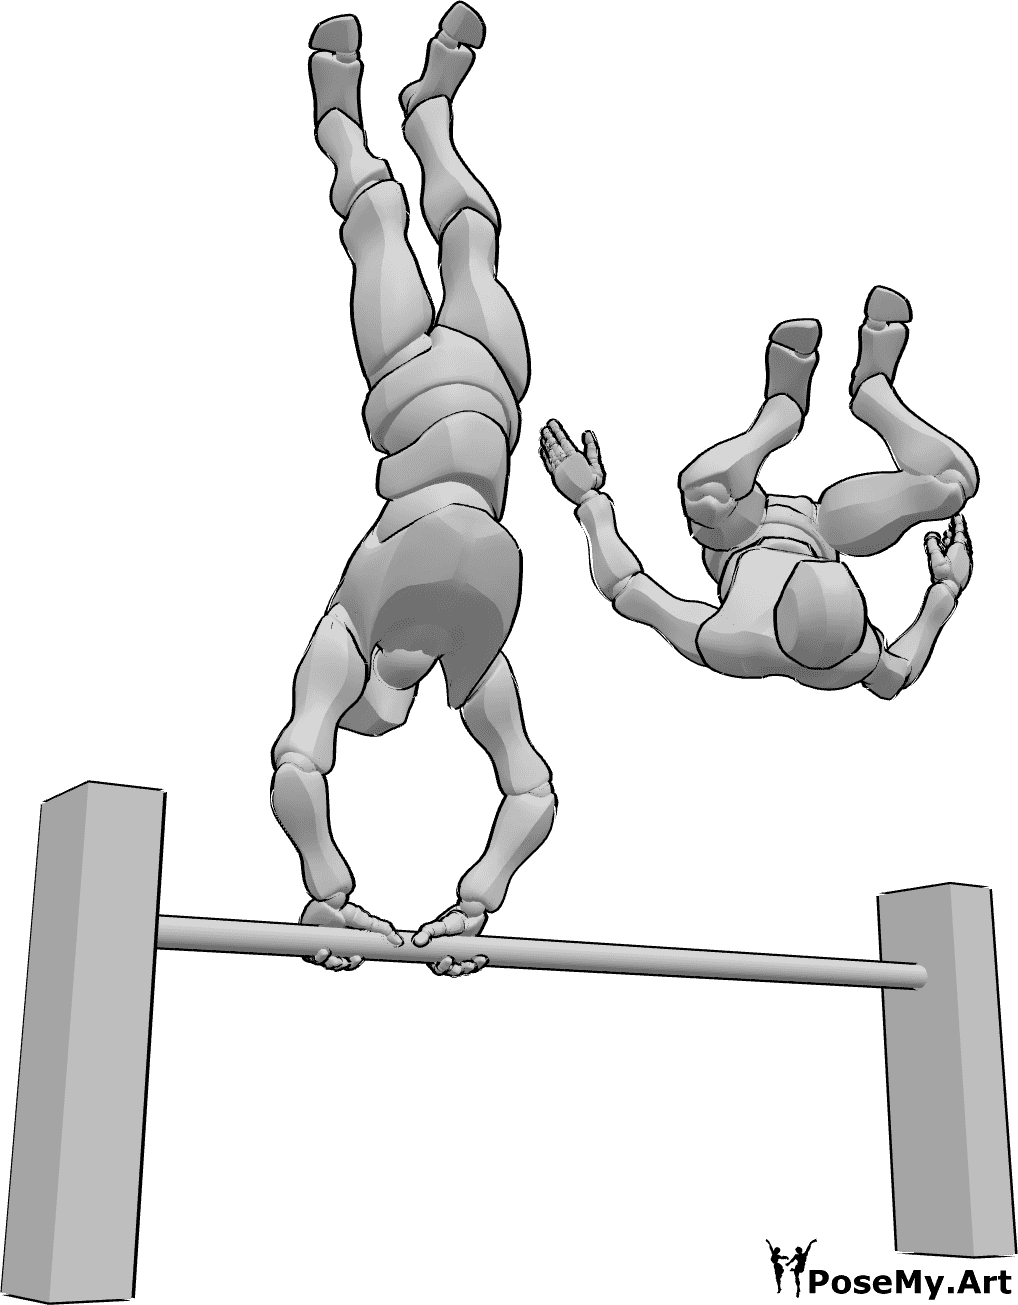 Pose Reference - Parkour exercising pose - Two males are exercising, one of them is handstanding on a barrier, the other one is doing a front flip